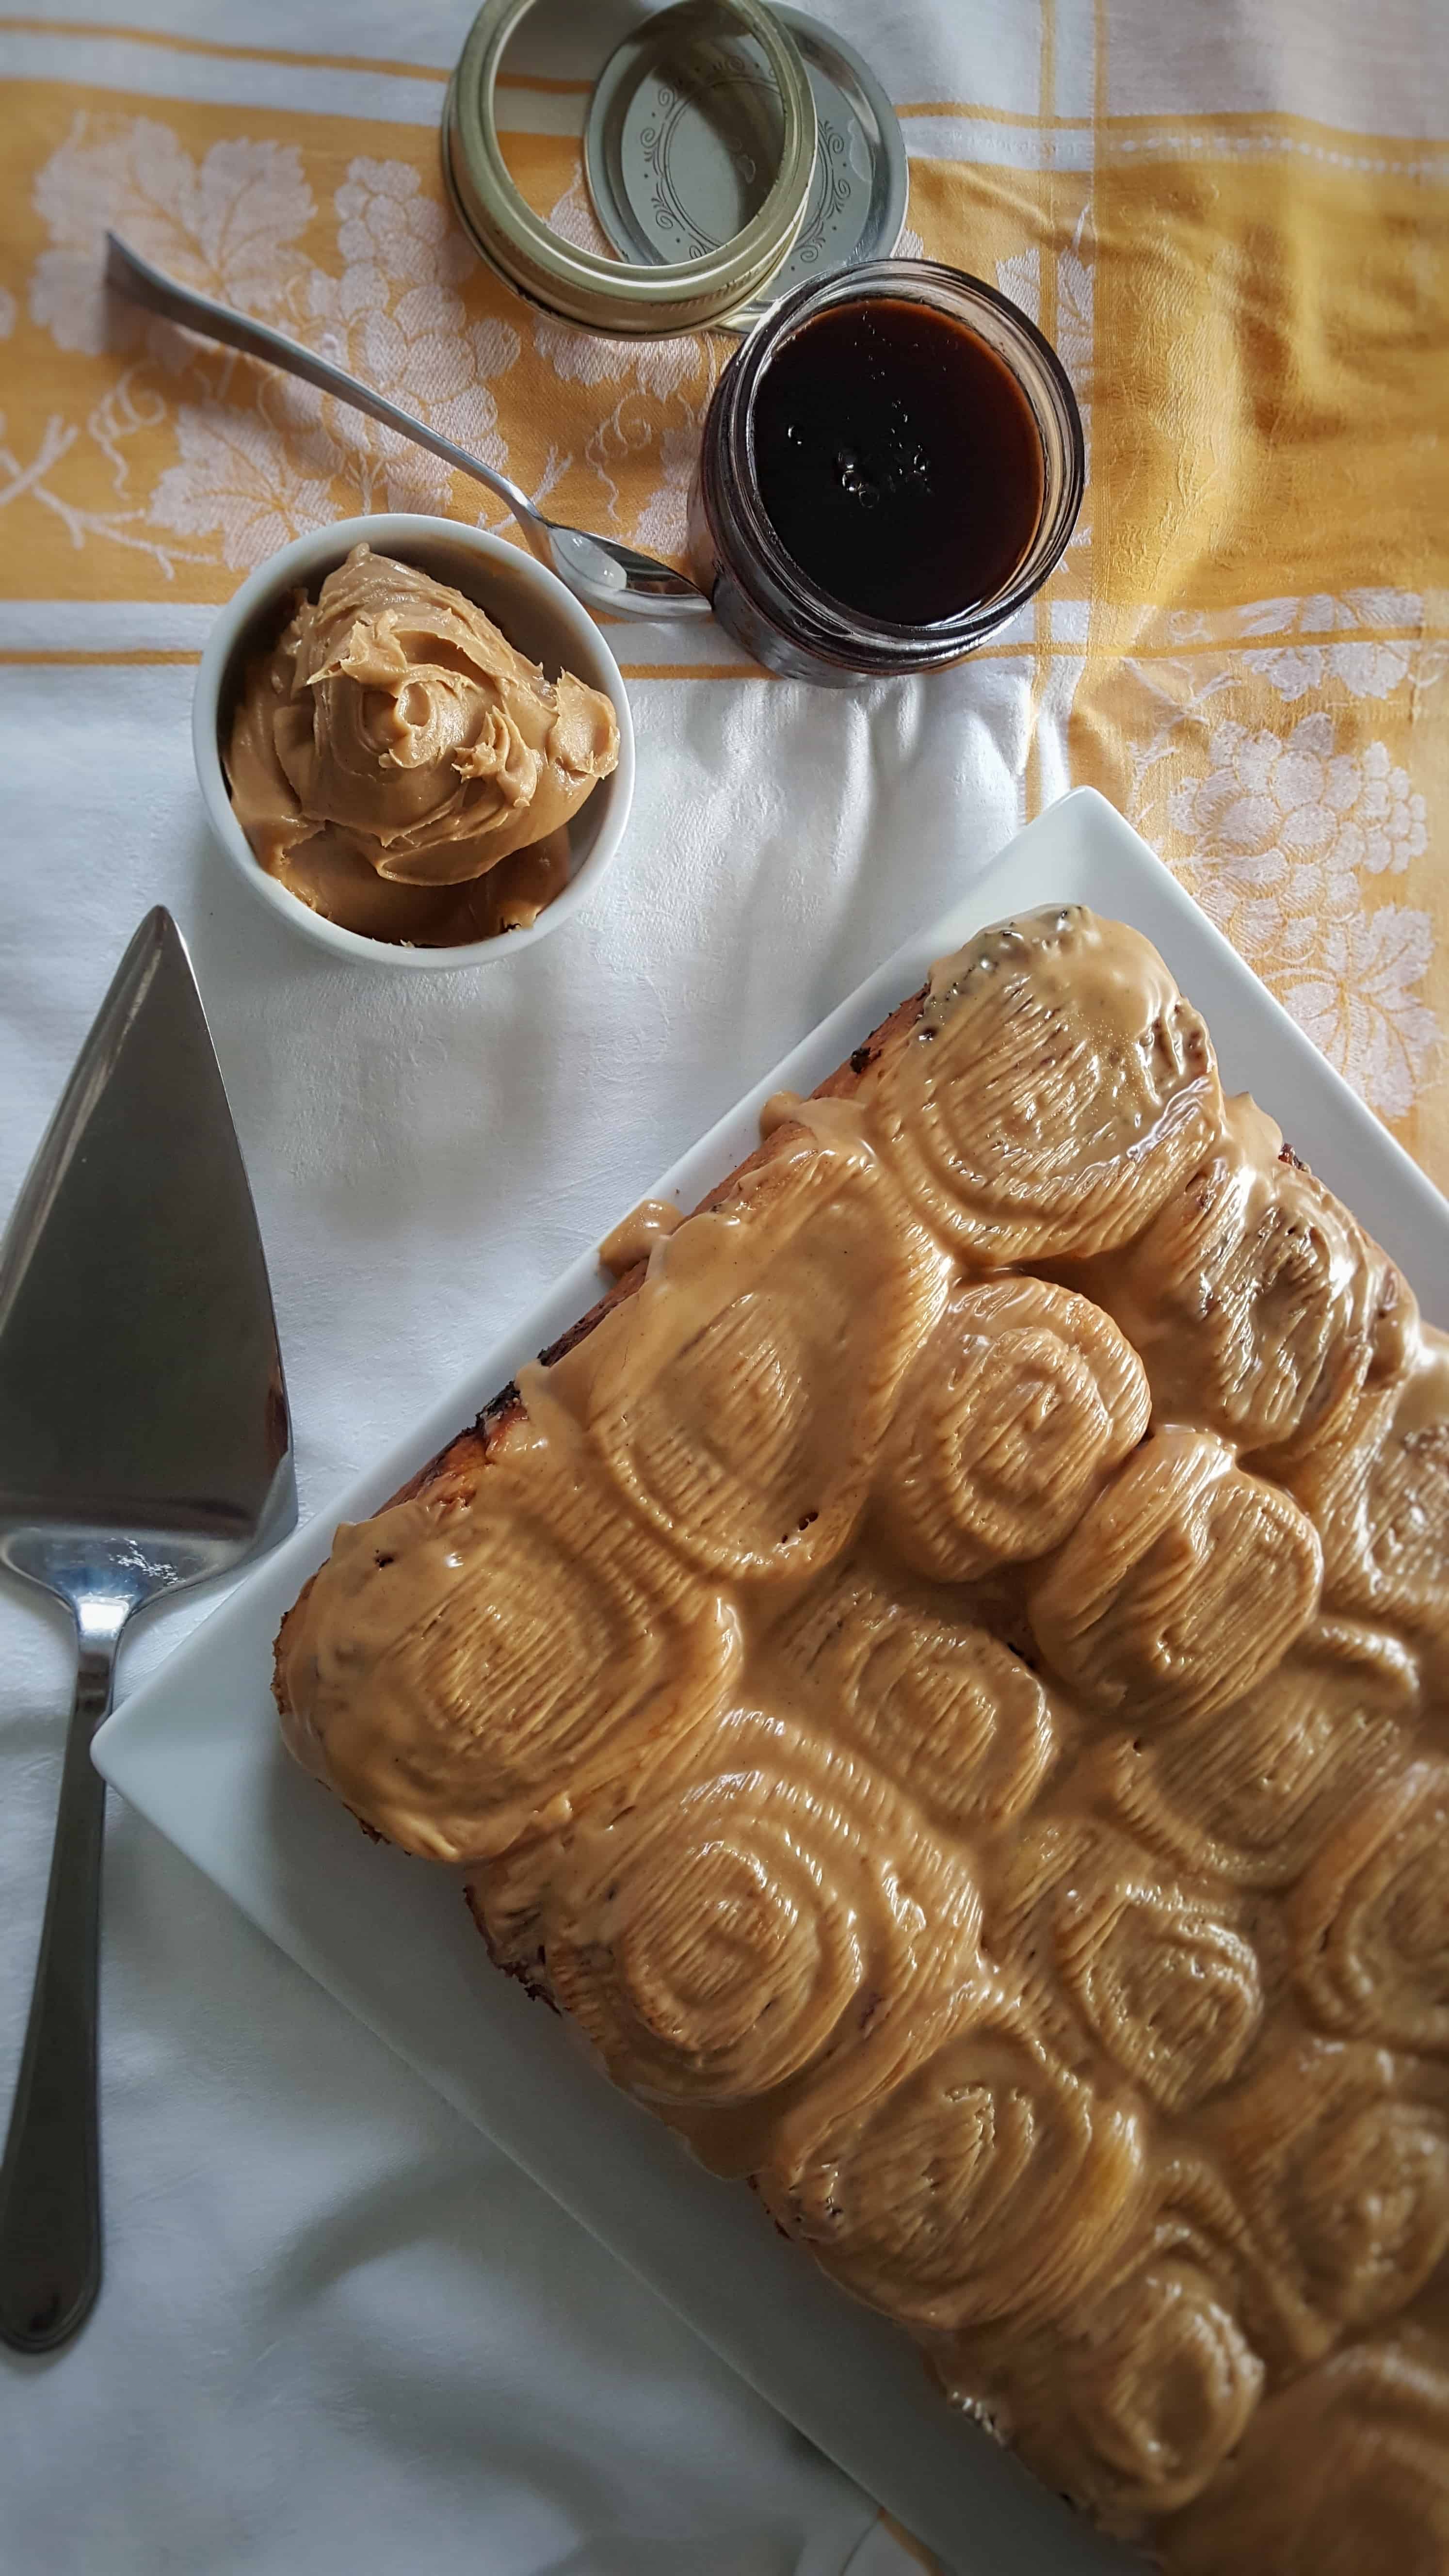 Peanut butter and jelly cinnamon rolls